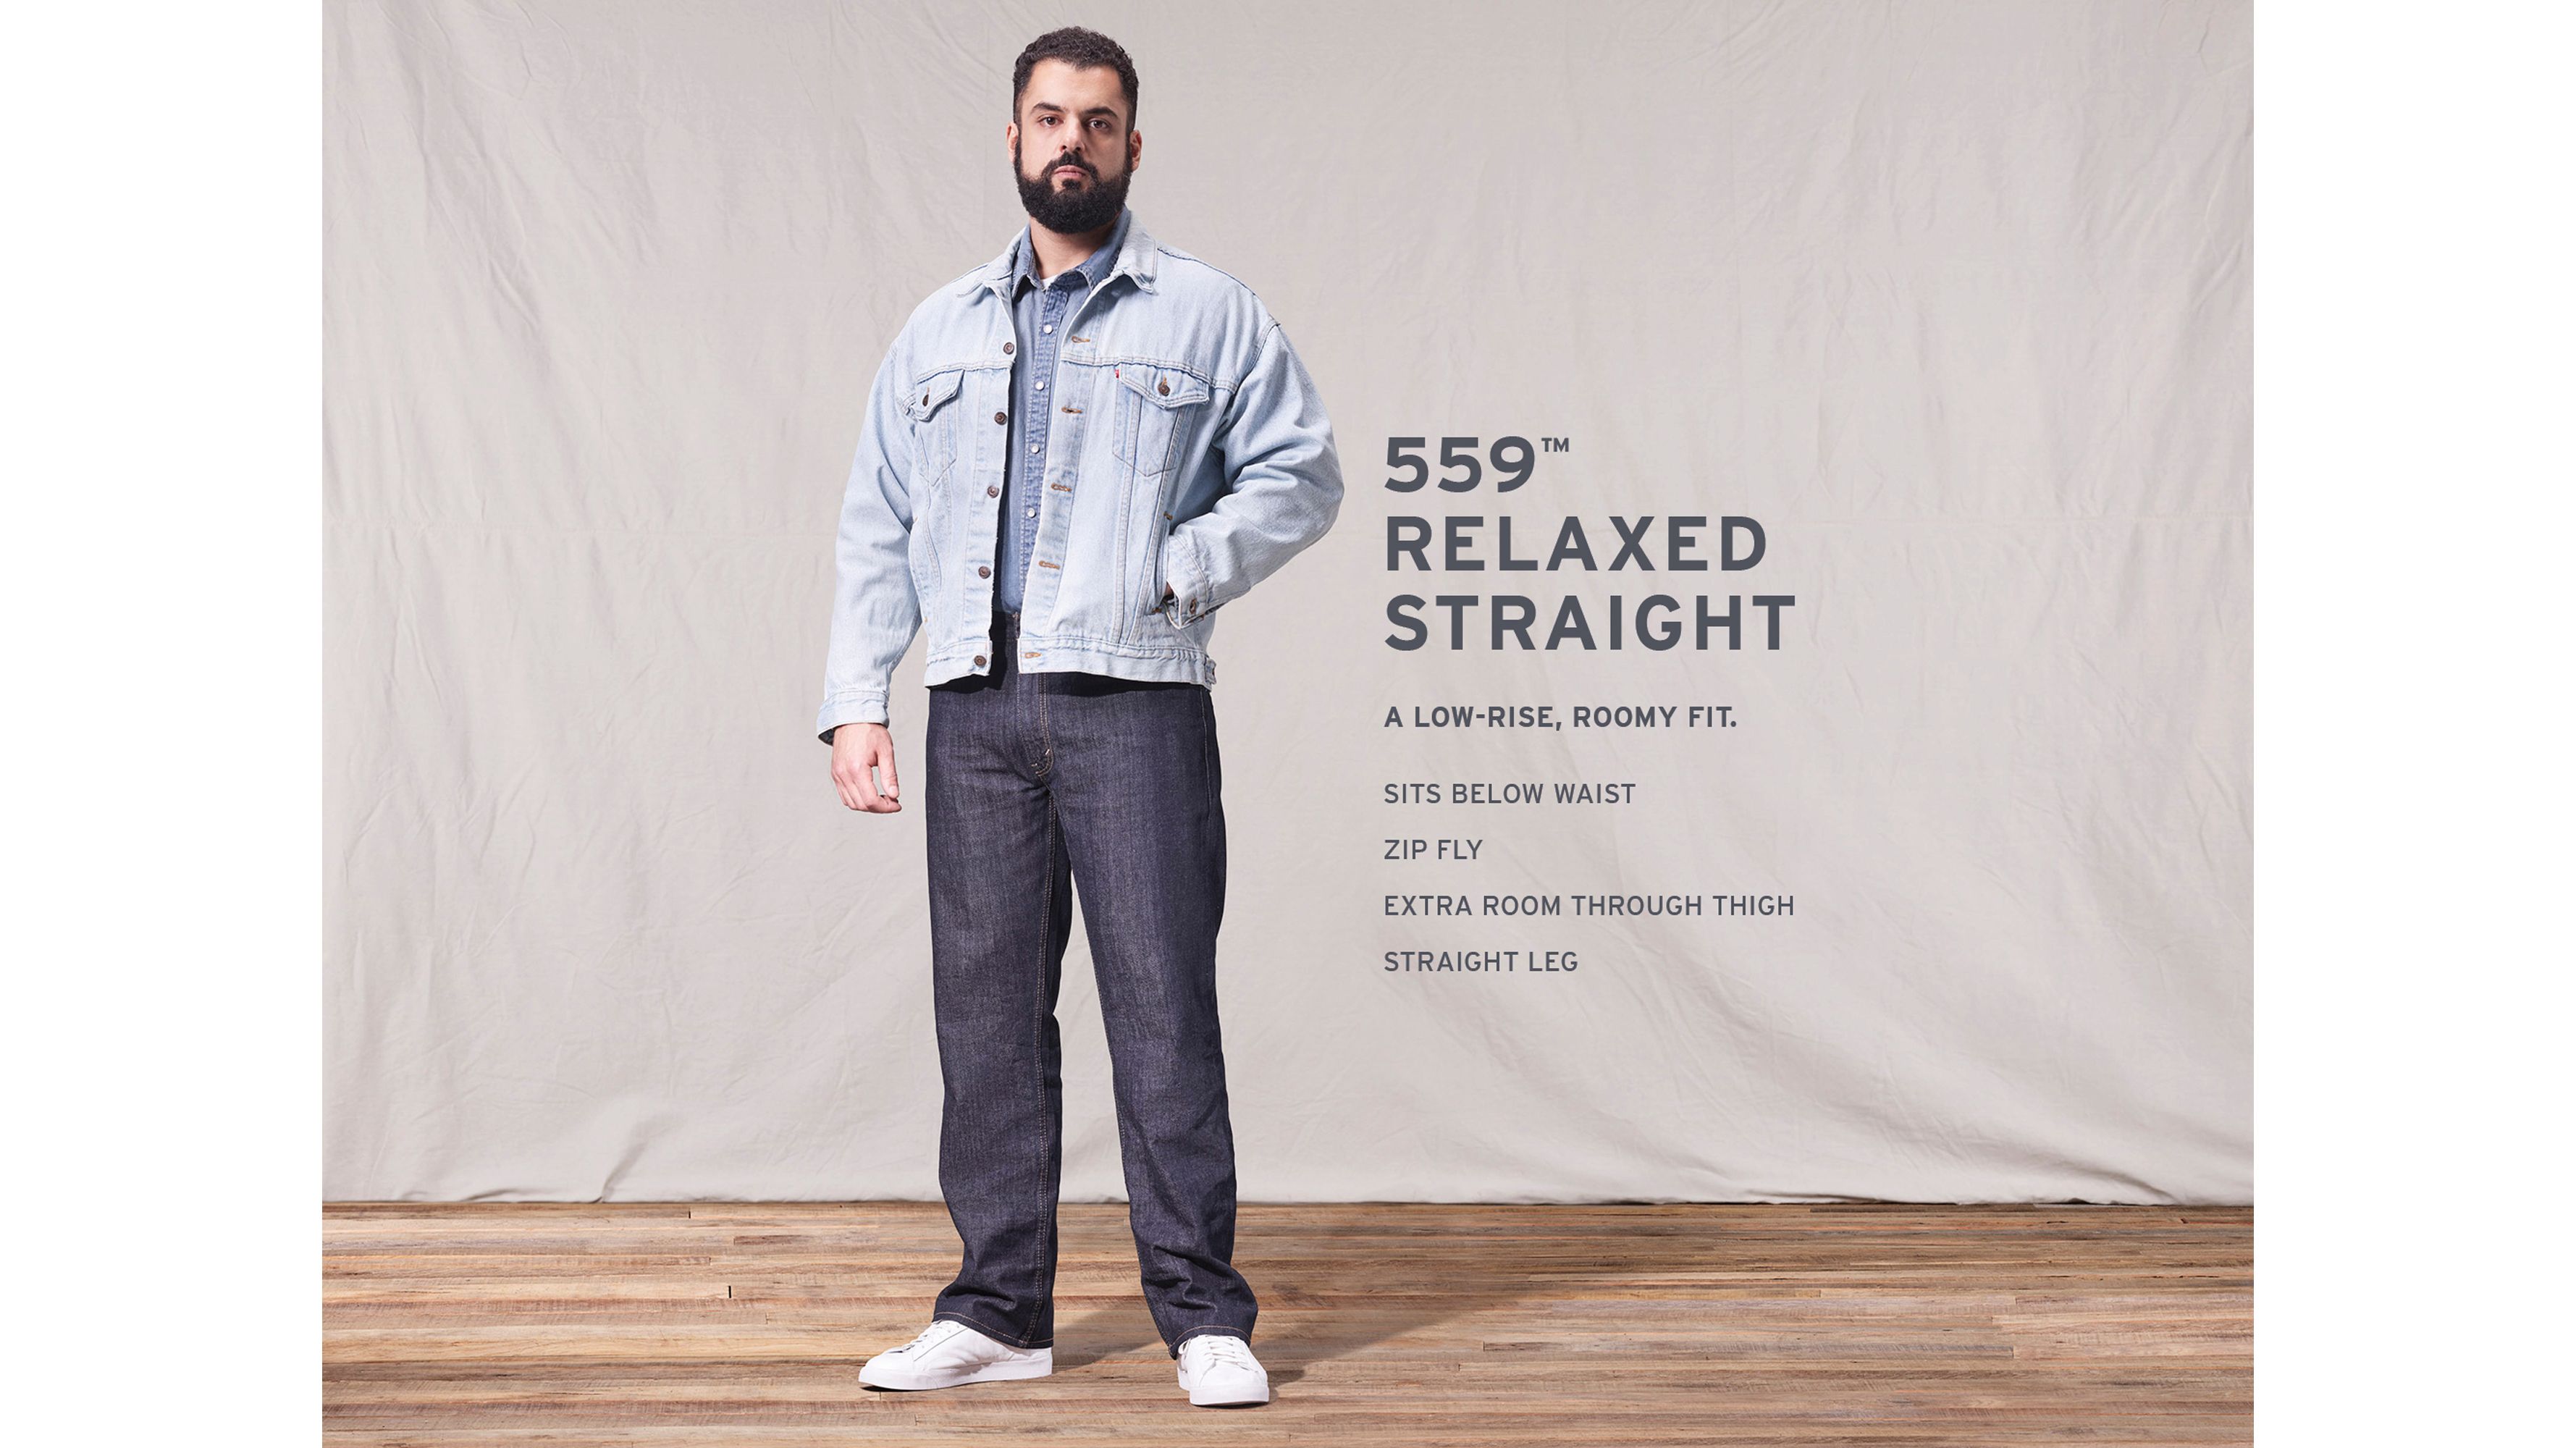 levis 559 relaxed fit